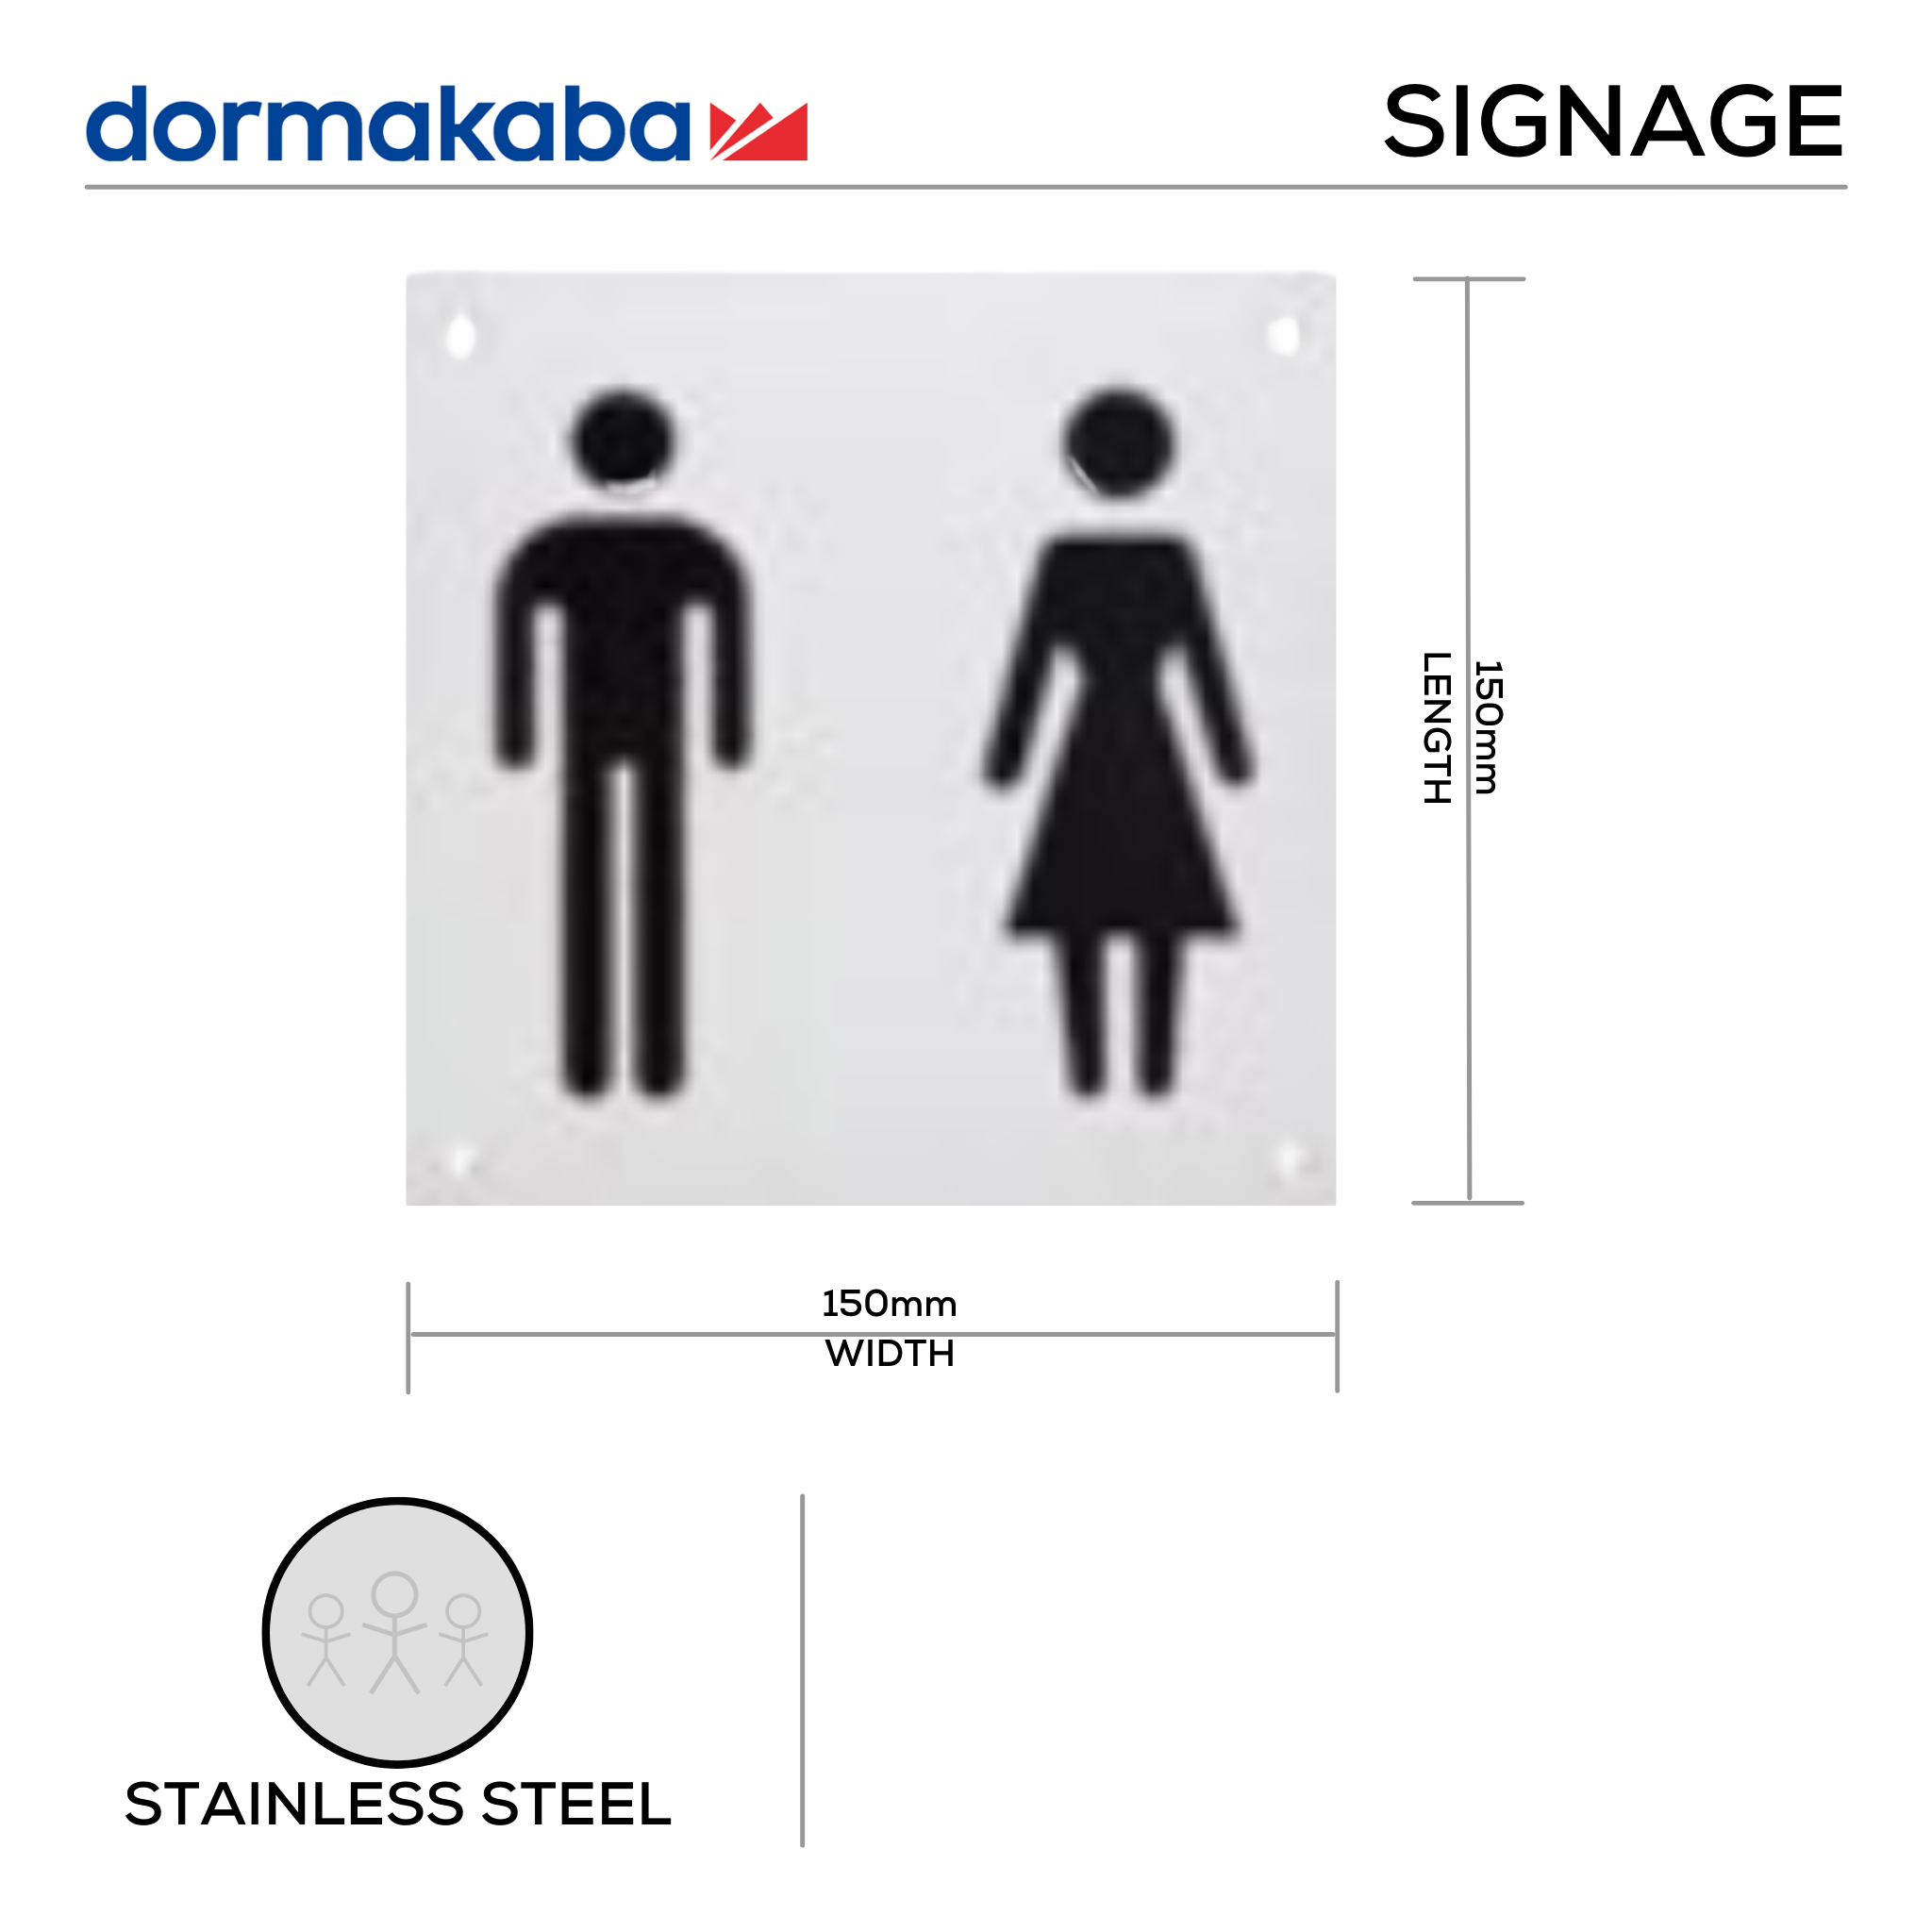 DSS-132, Door Signage, Male & Female , 150mm (l), 150mm (w), 1,2mm (t), Stainless Steel, DORMAKABA